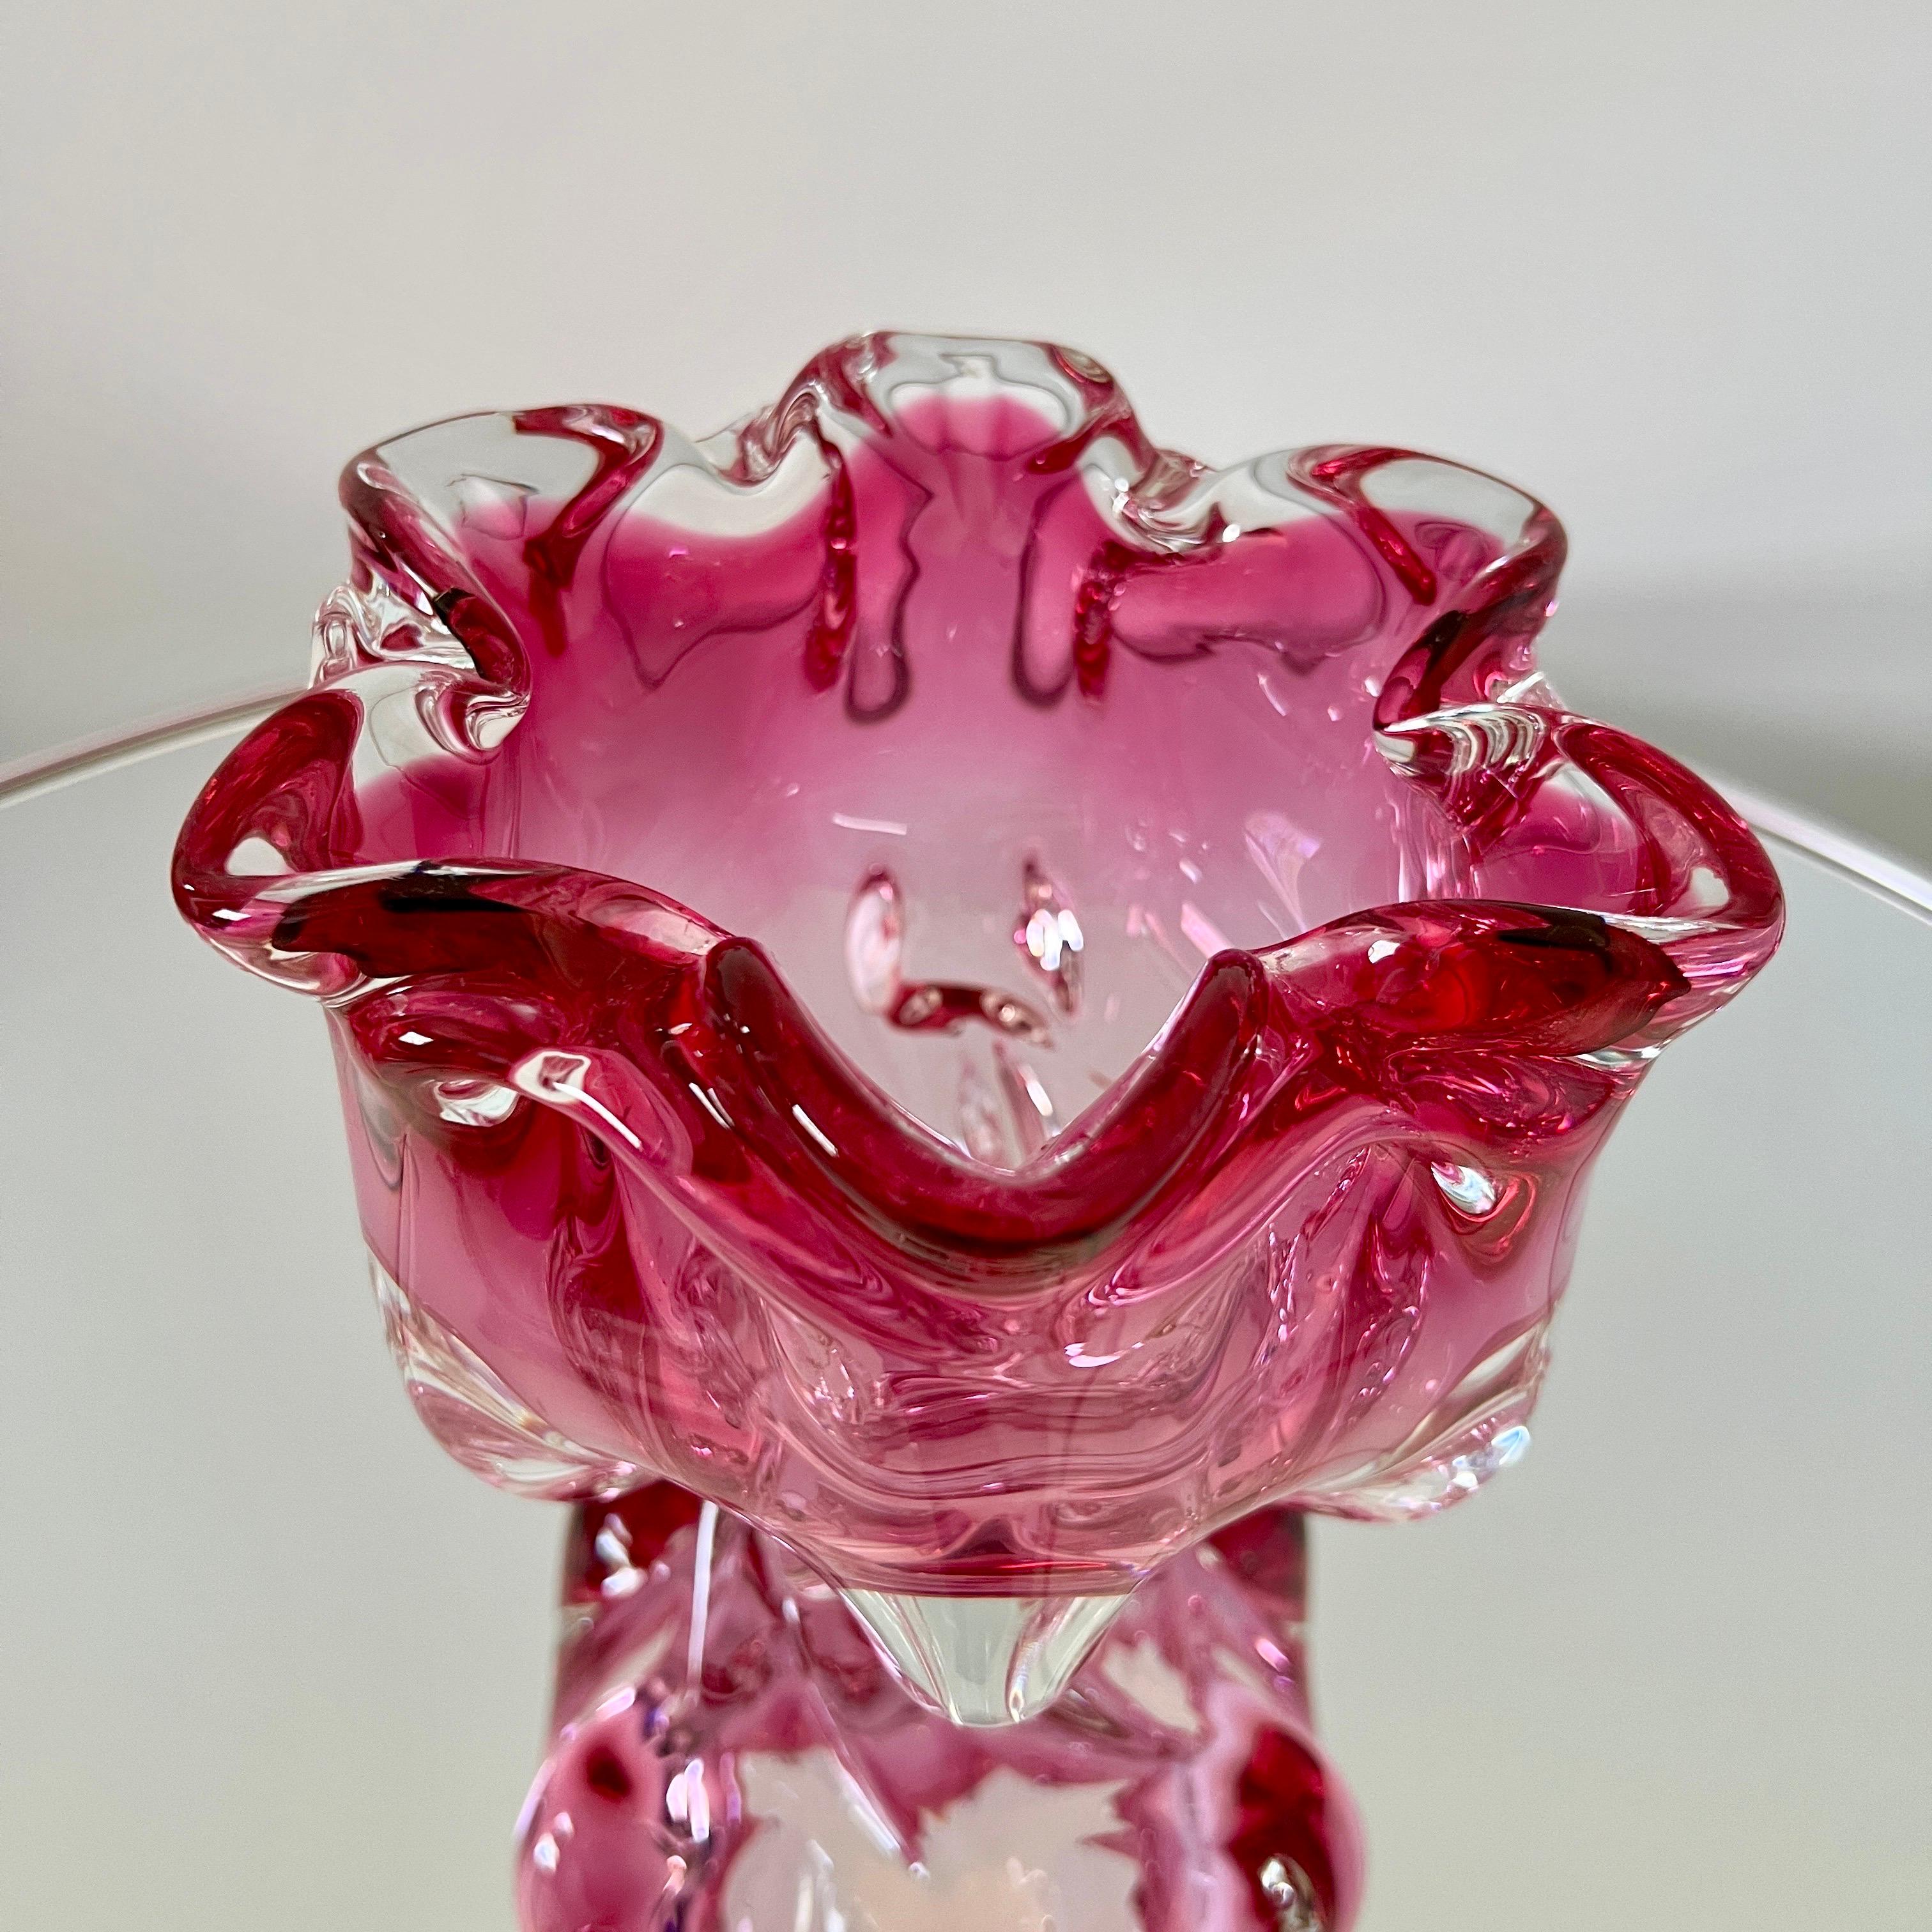 Murano Glass Pink Murano Floral Vase with Footed Base by Fratelli Toso, c. 1950's For Sale